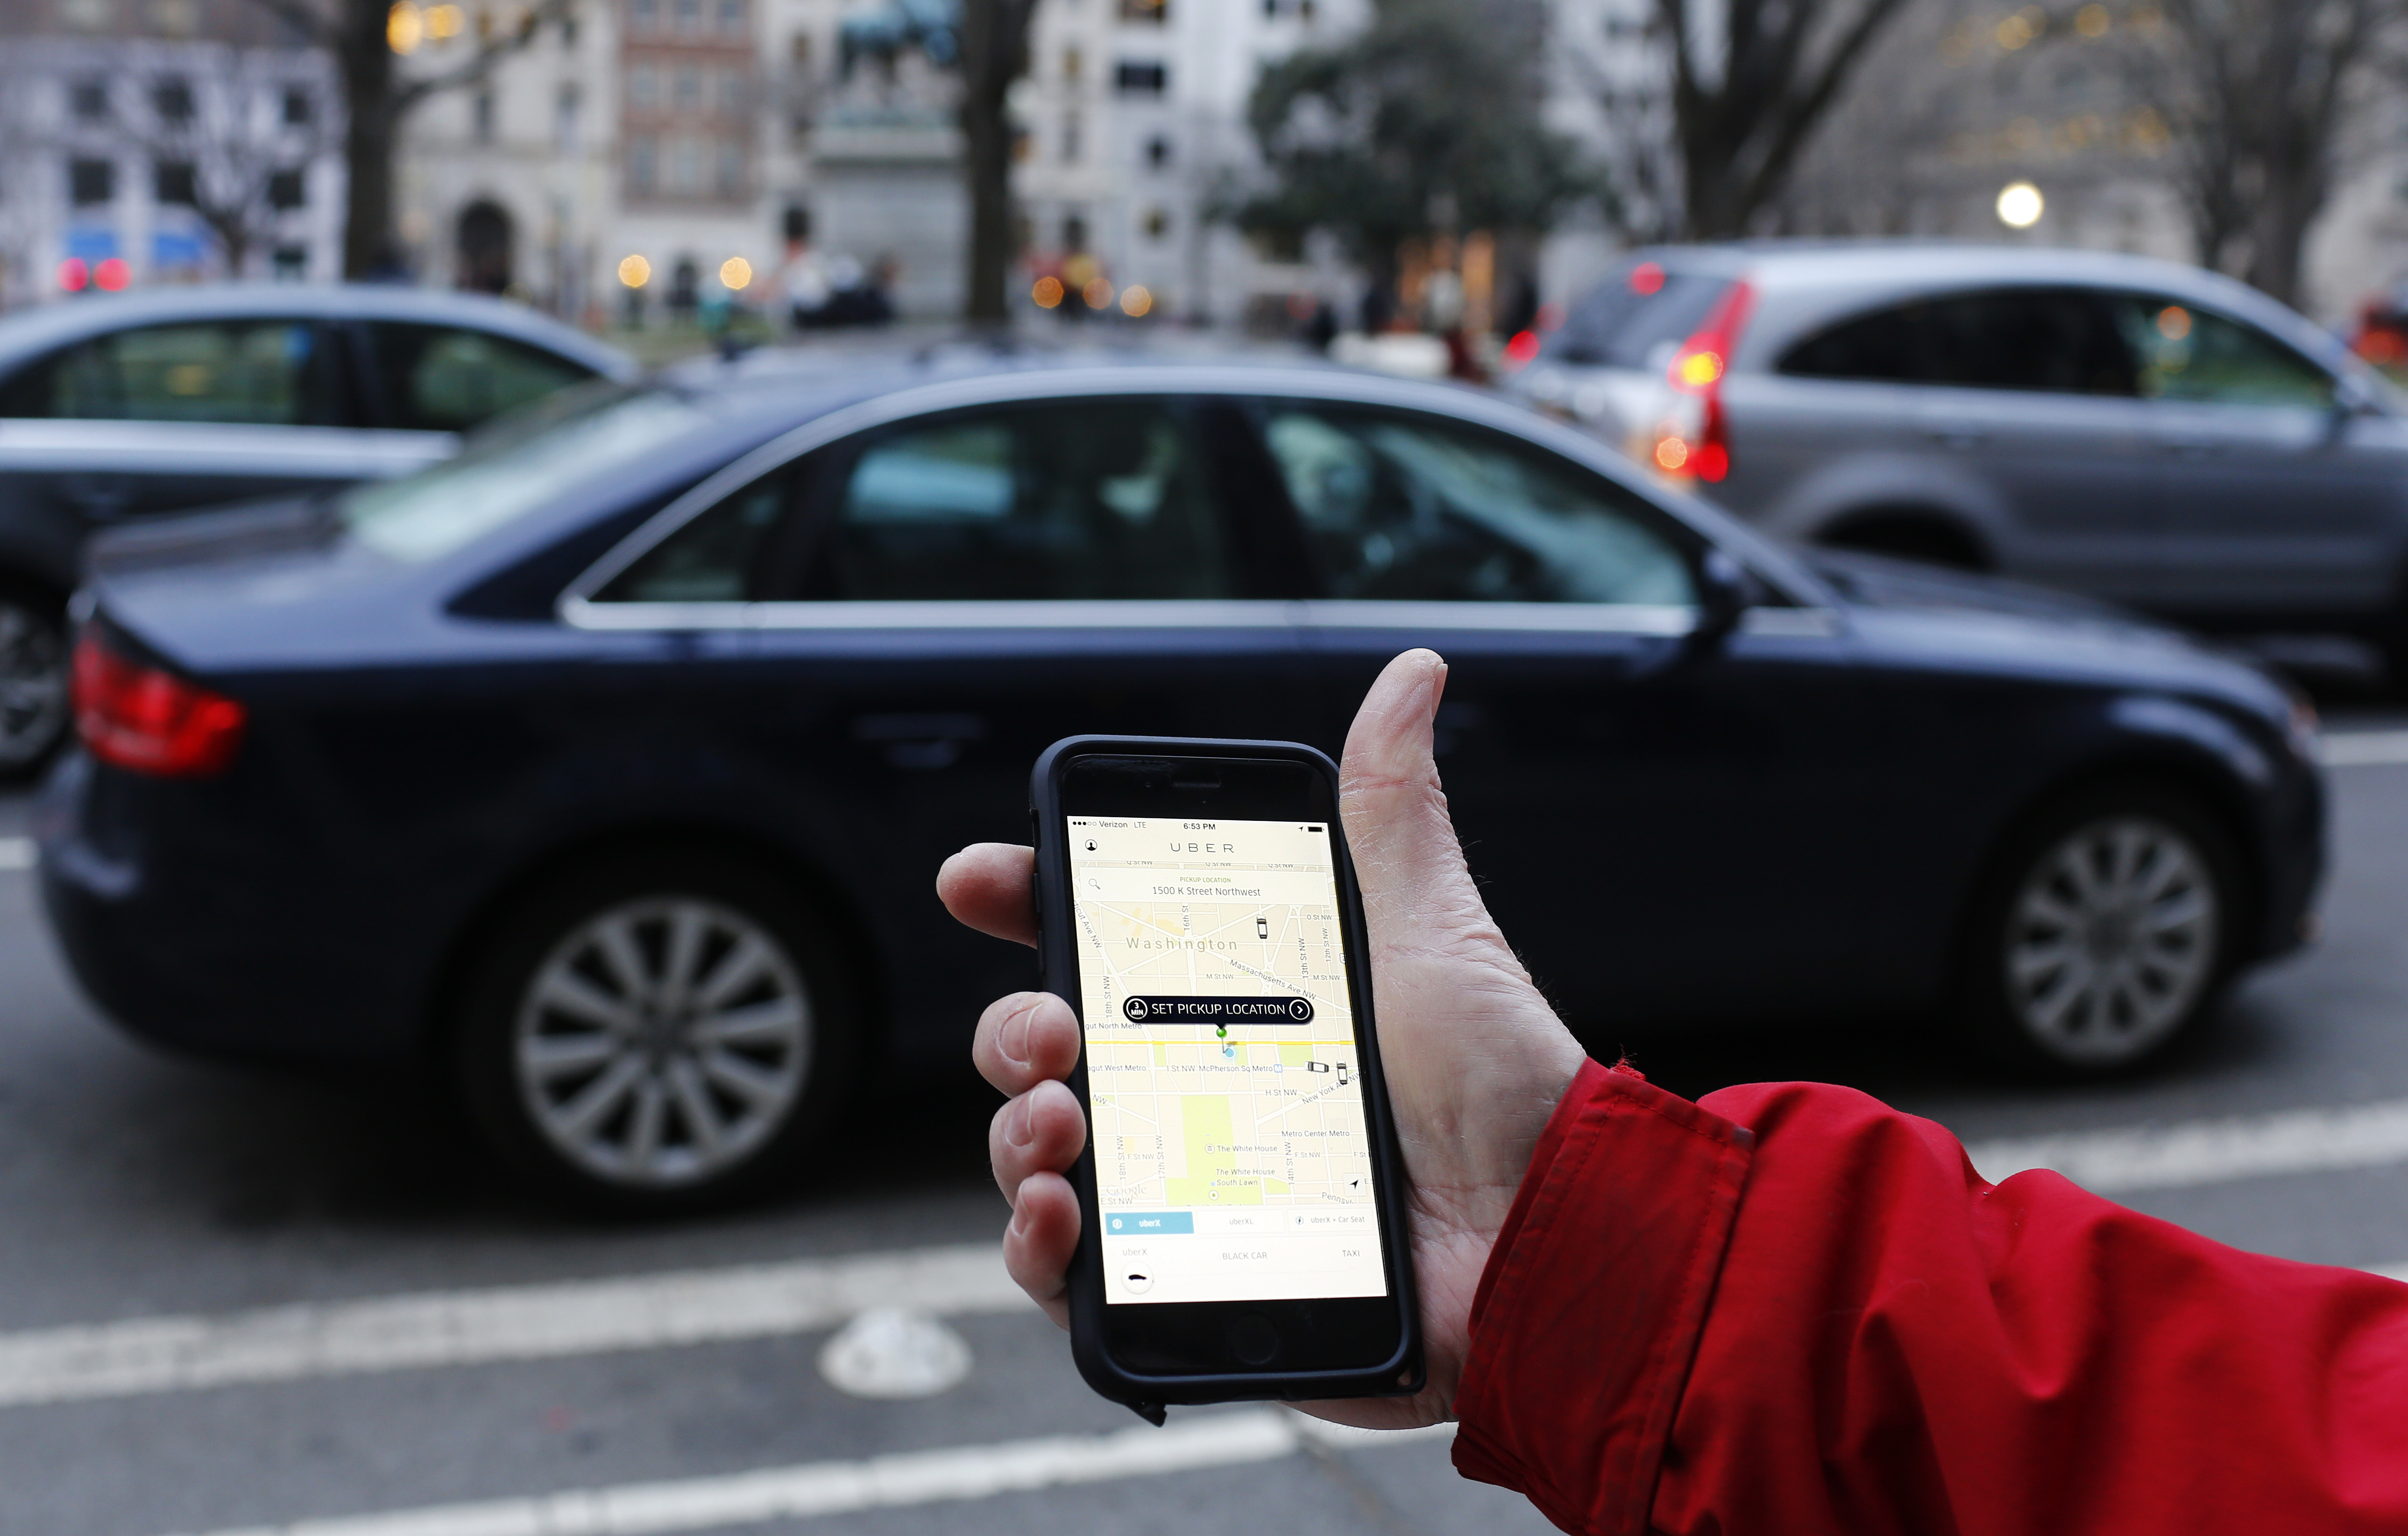 Giving Up Uber Could Save You $323,000